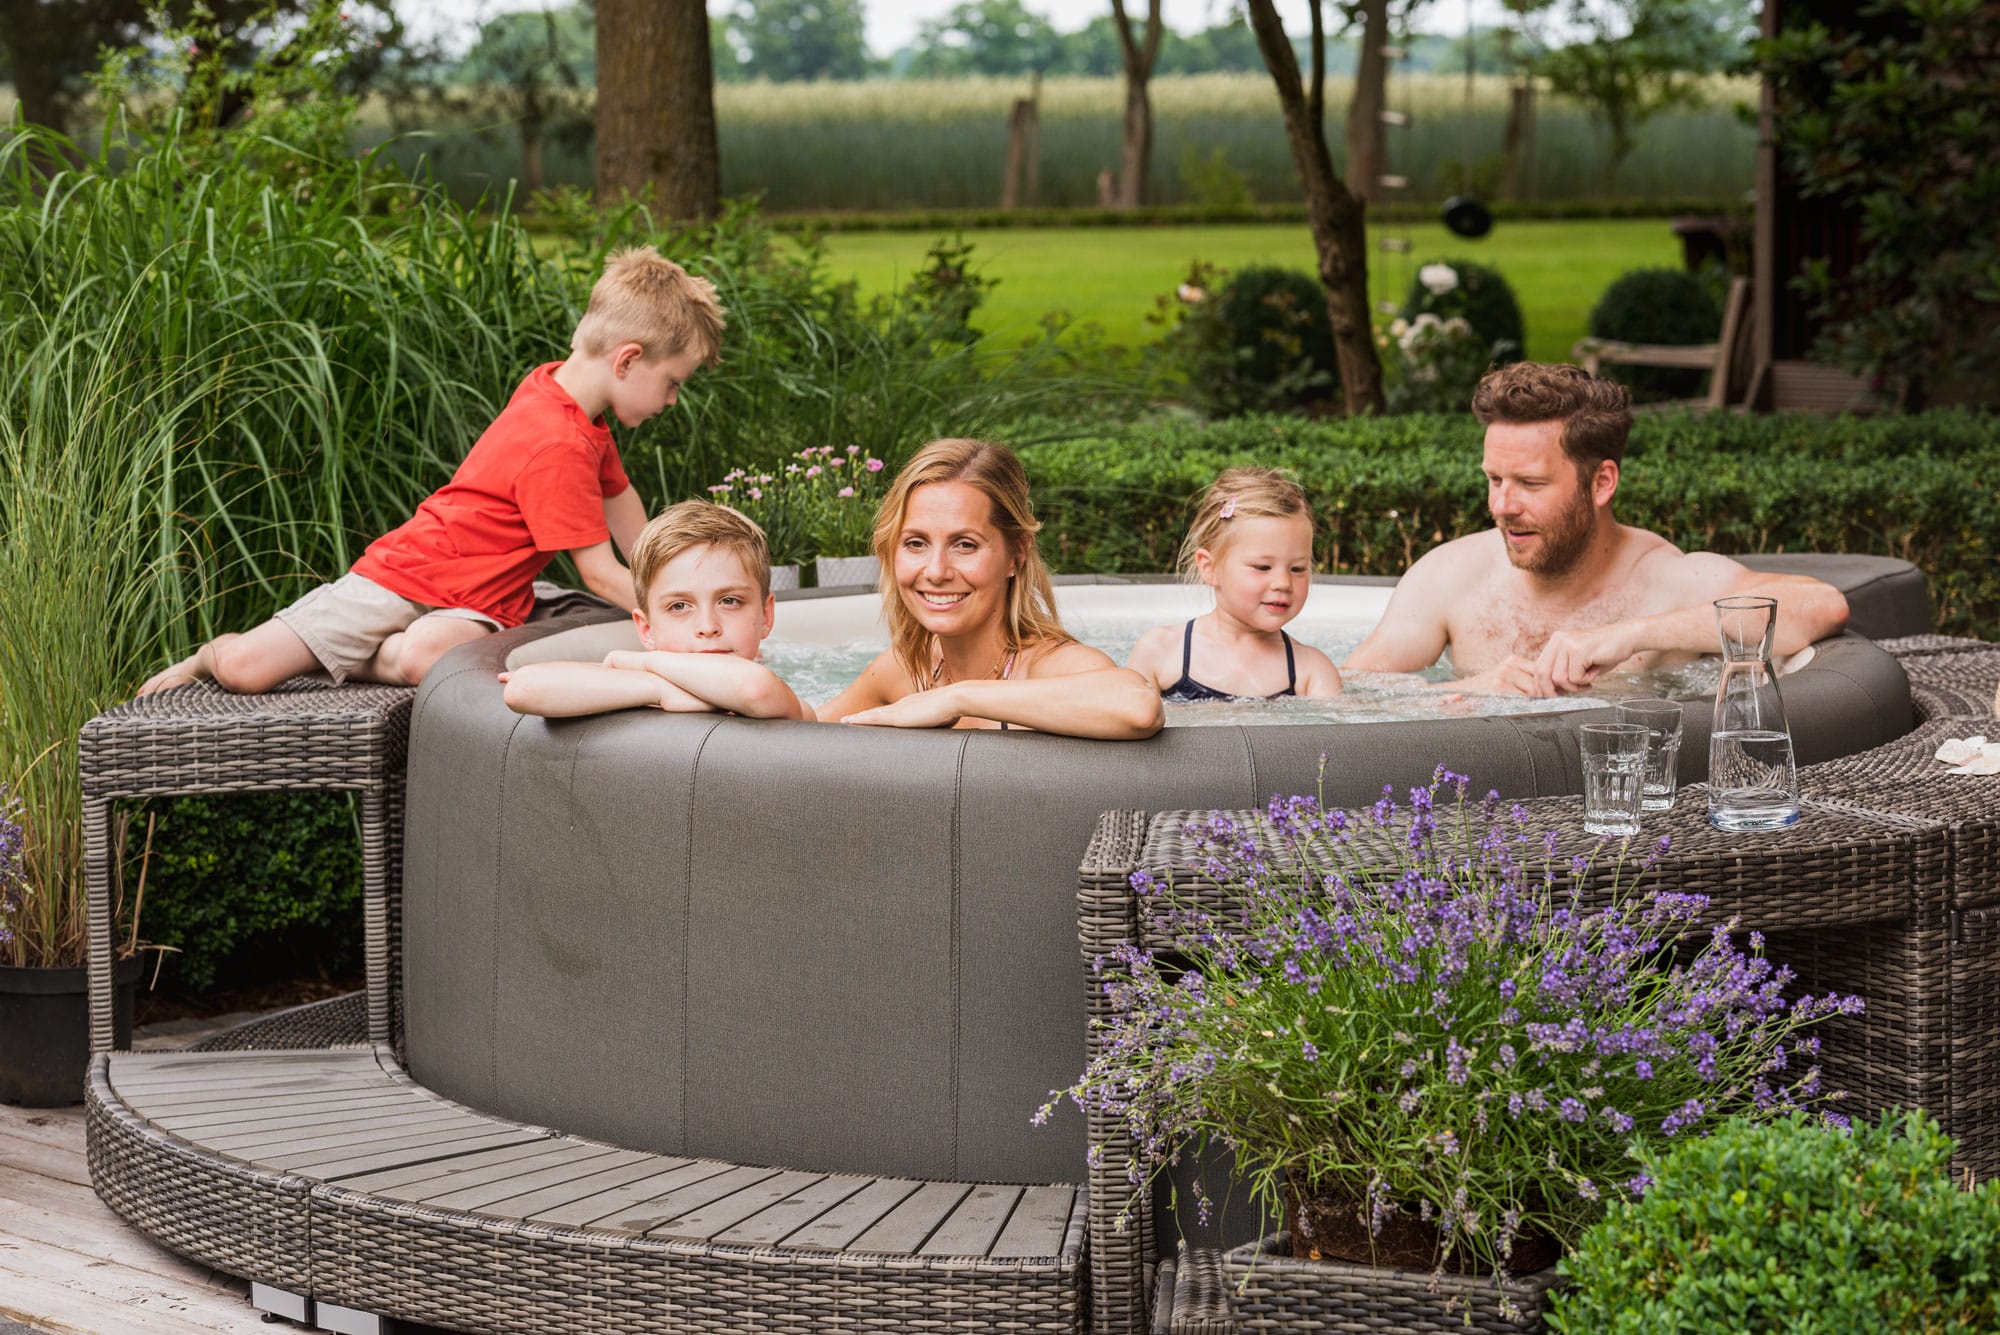 The Softub Spas Portico Model Now Available in a Cool (Warm) New Vinyl and Color